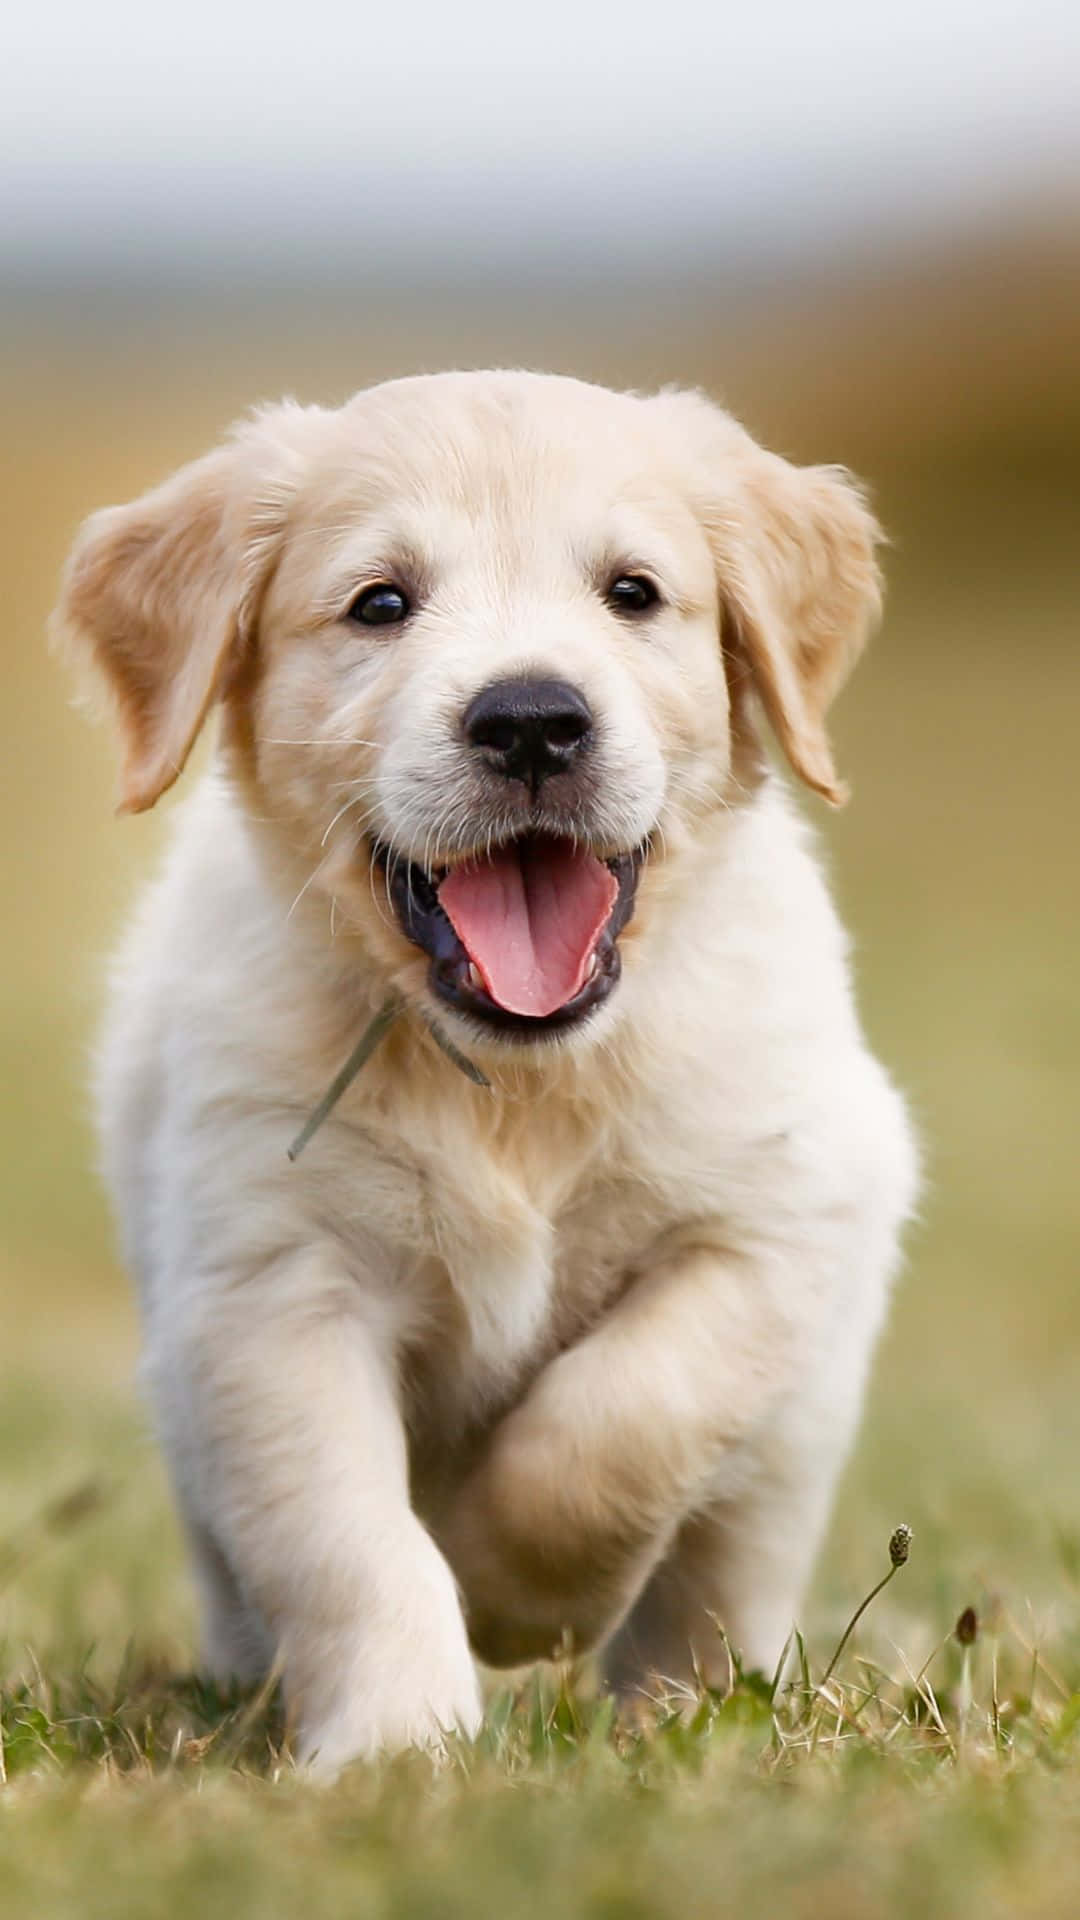 Cuddly And Energetic Golden Retriever Puppy Background